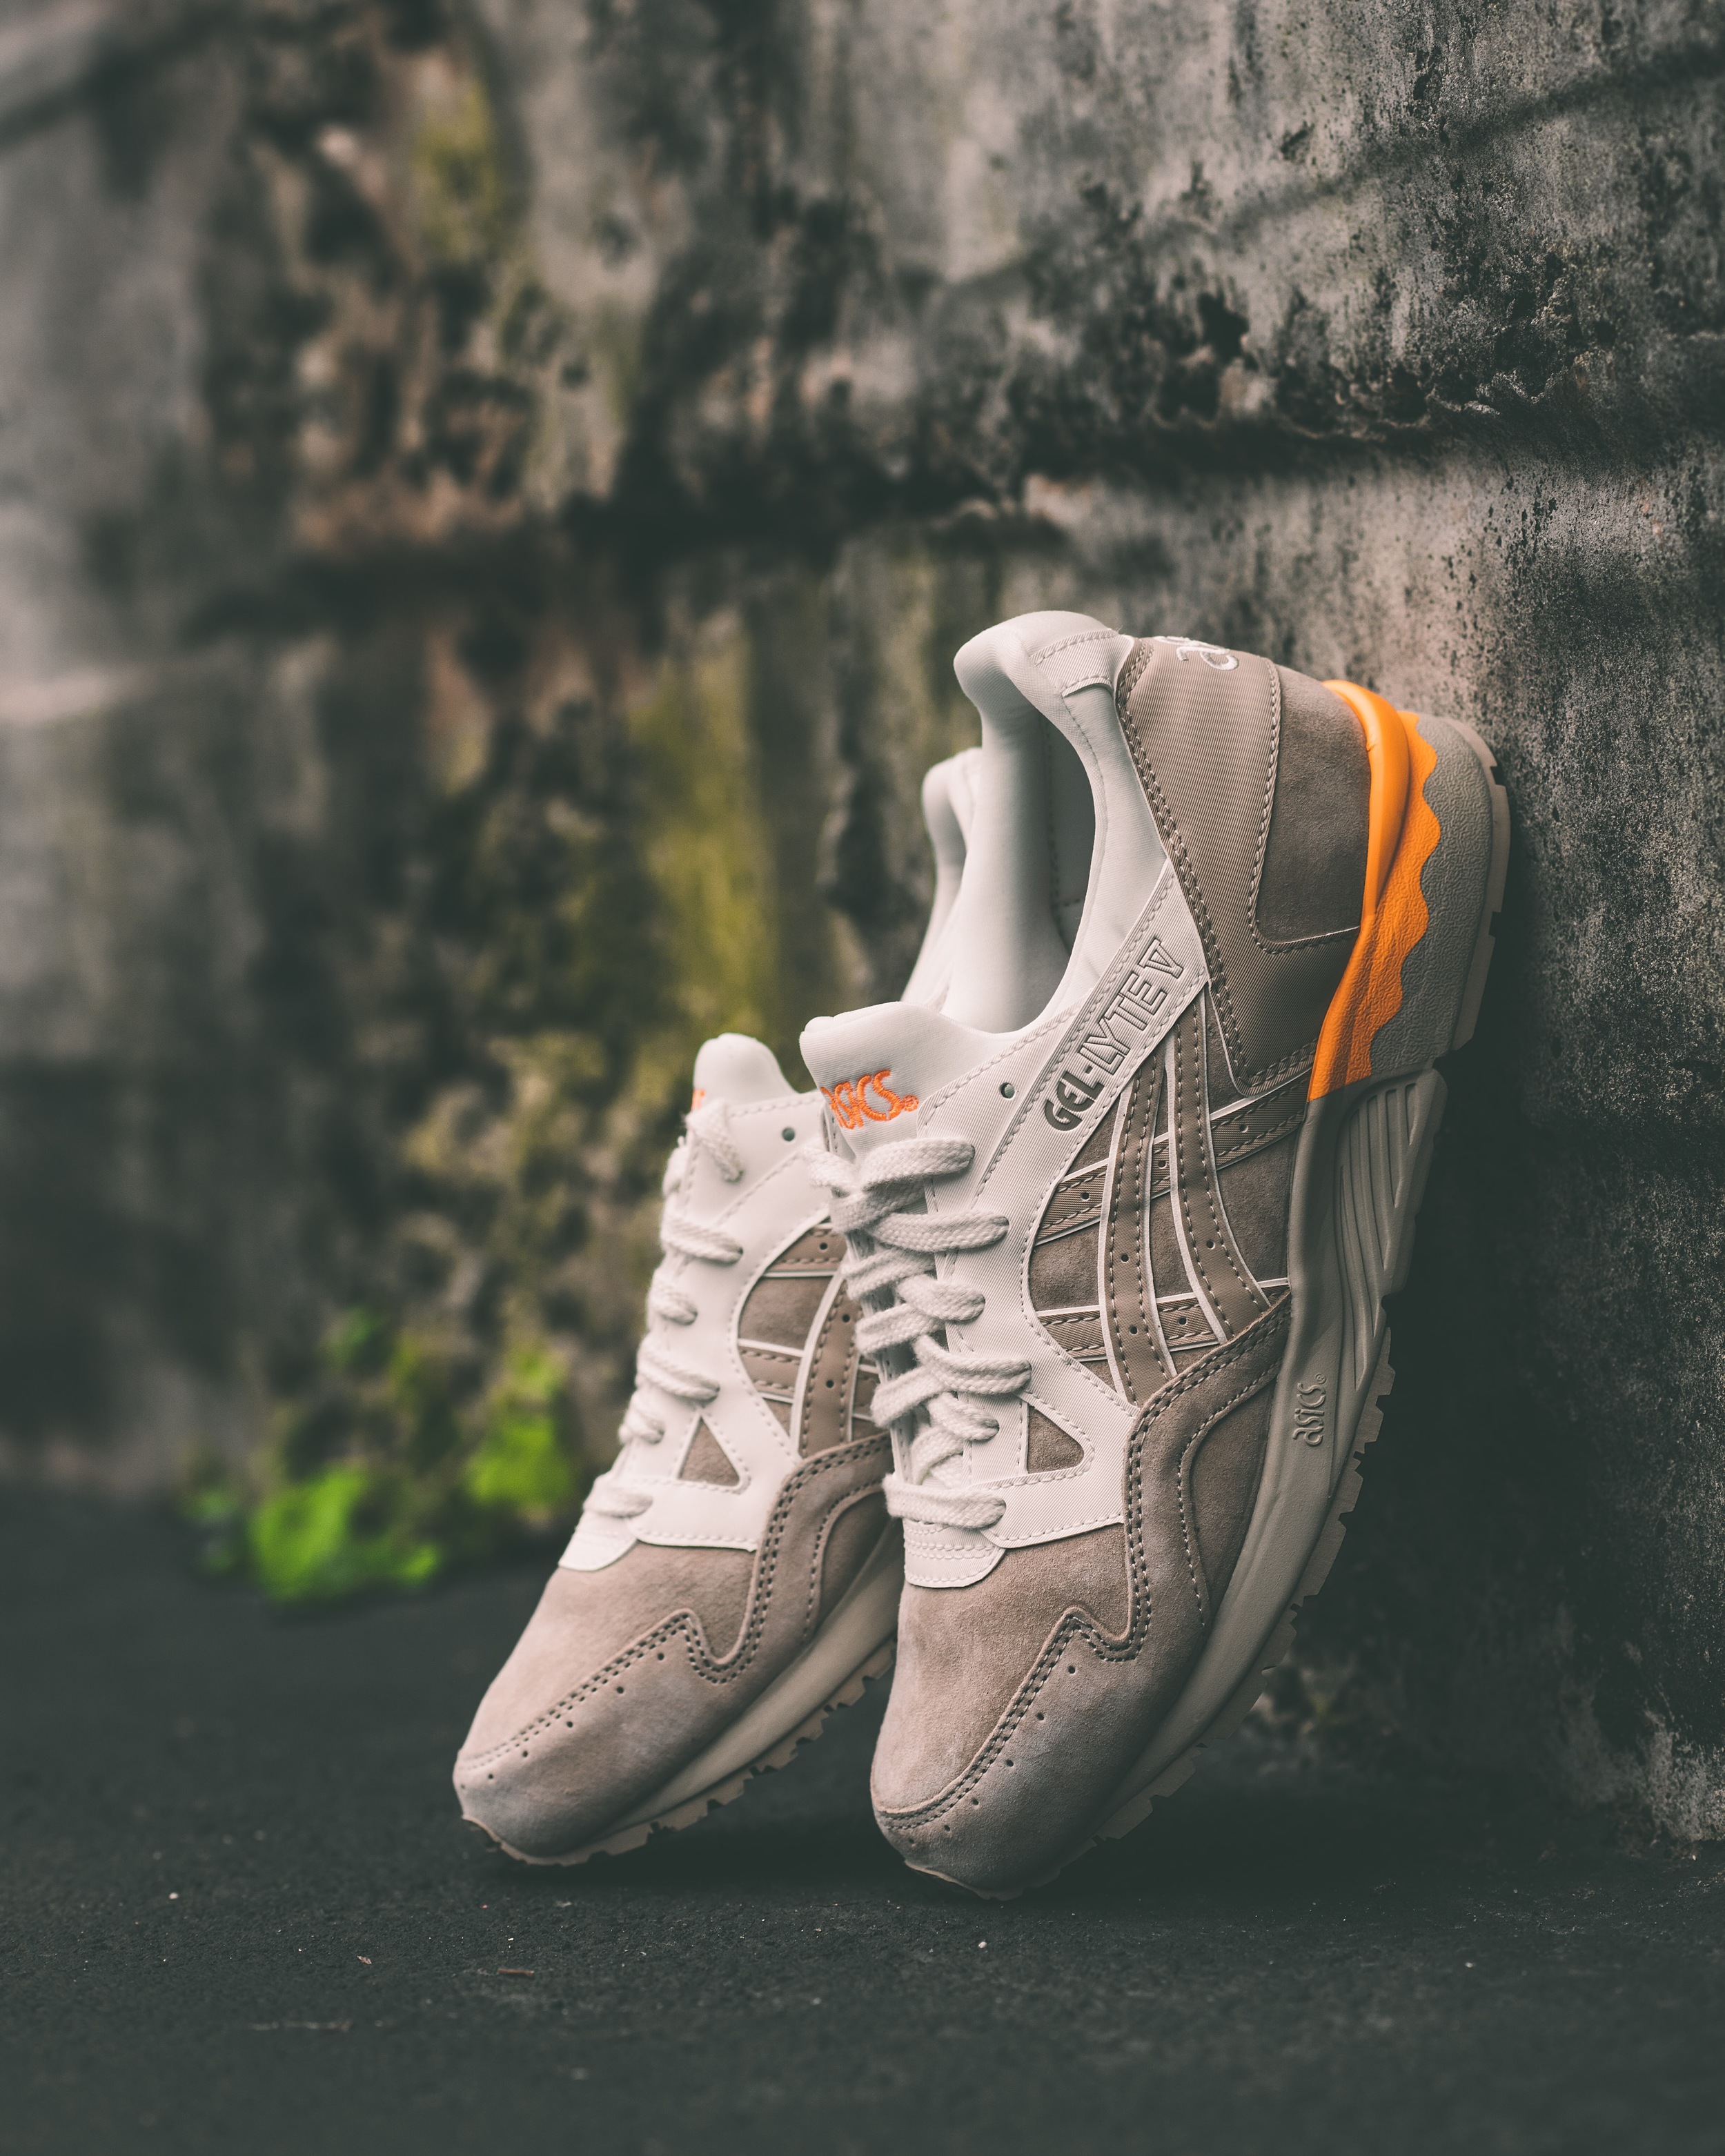 ASICS V "CASUAL LUX" PACK — Epitome